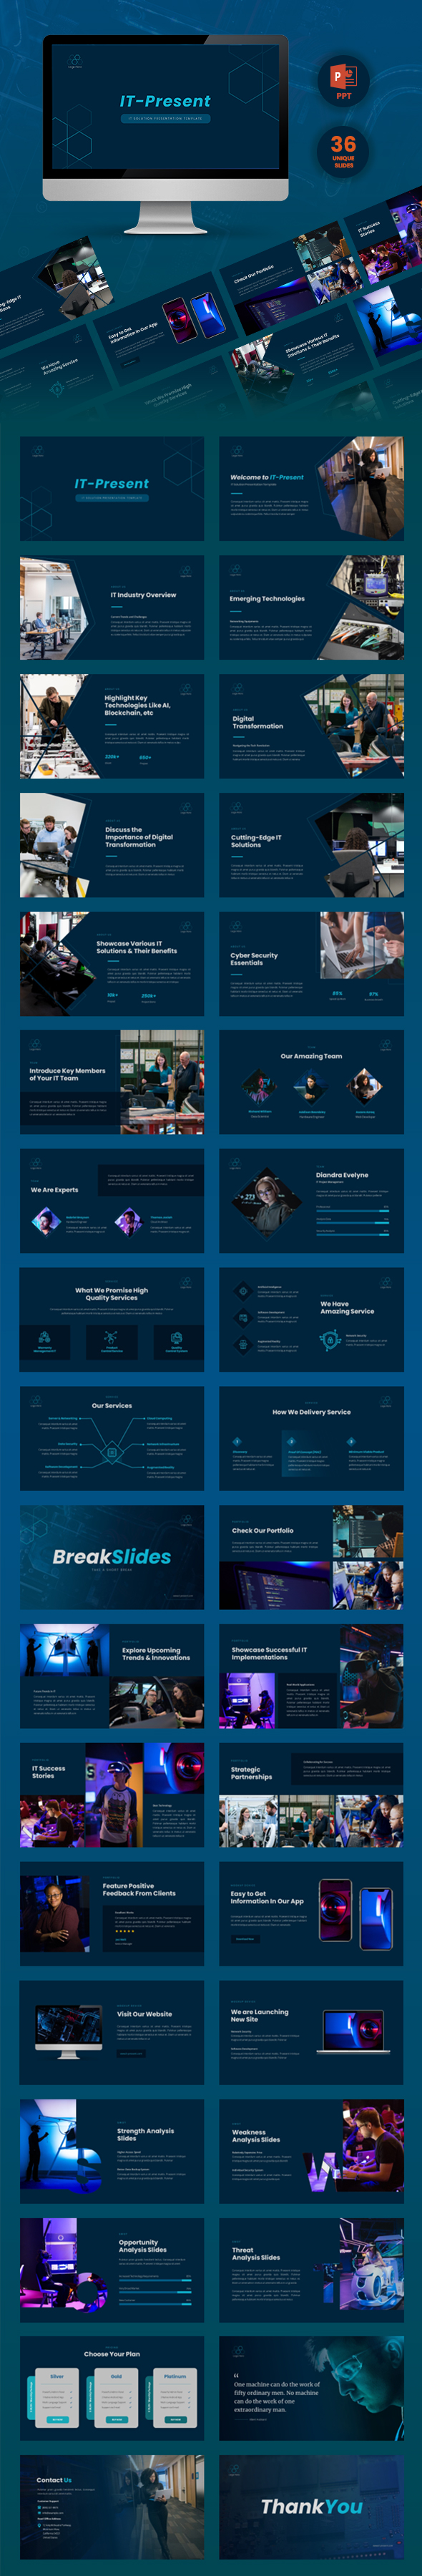 IT-Present - IT Solution PowerPoint Template